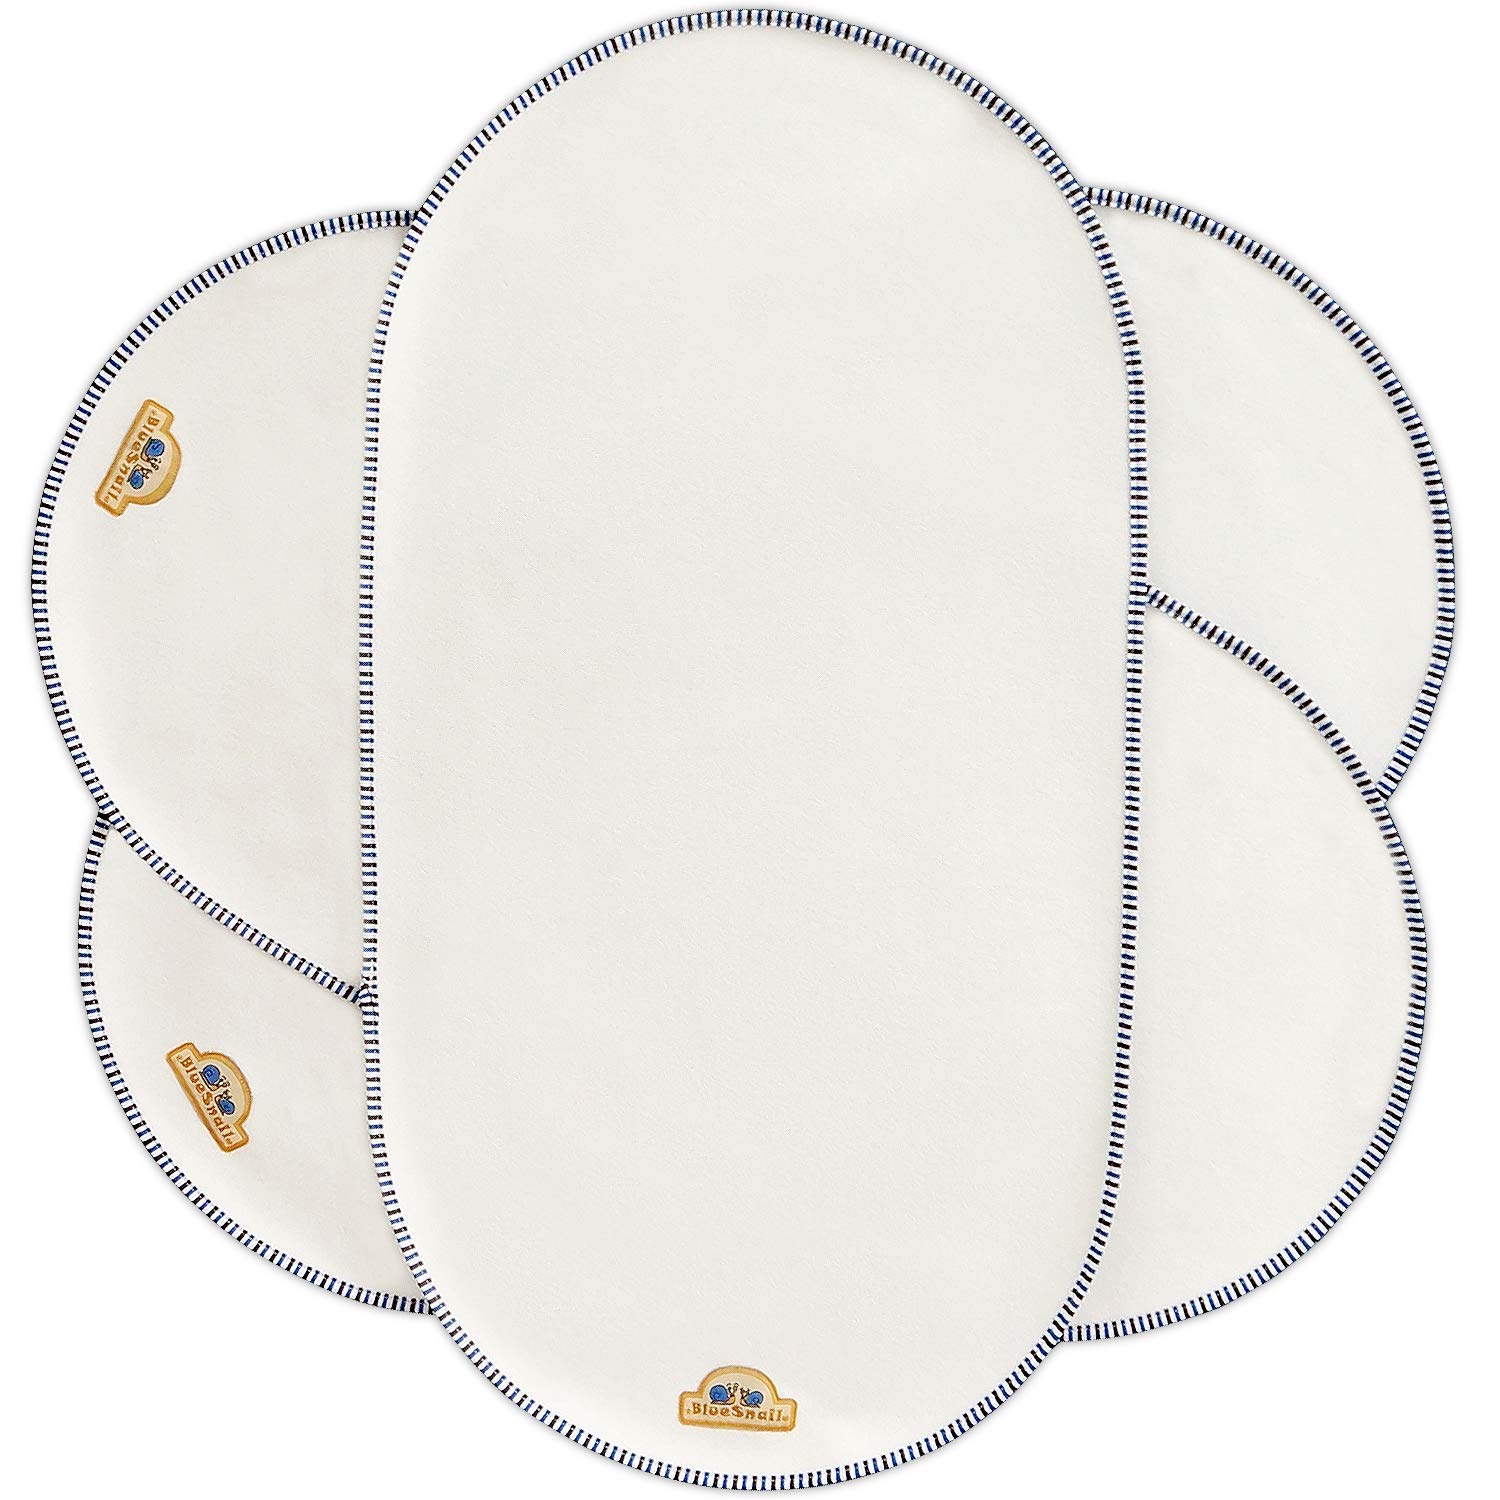 BlueSnail Waterproof changing Pad Liners 3 count (14X265, White), Bassinet Pad Liner